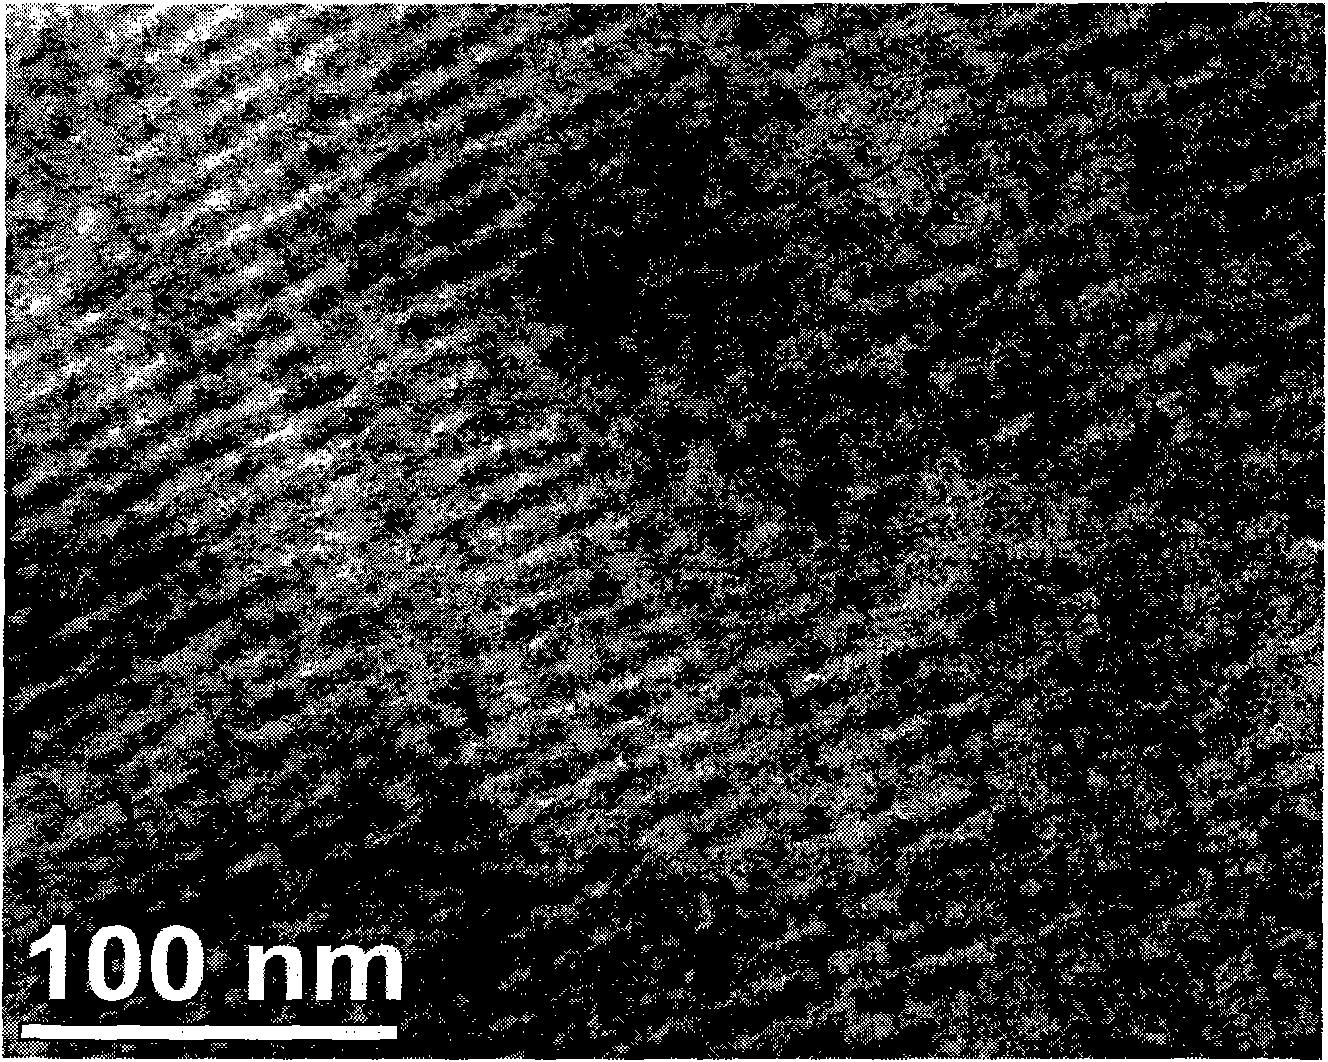 Ordered mesoporous carbon/tungsten carbide composite material and supported catalyst thereof and preparation method thereof